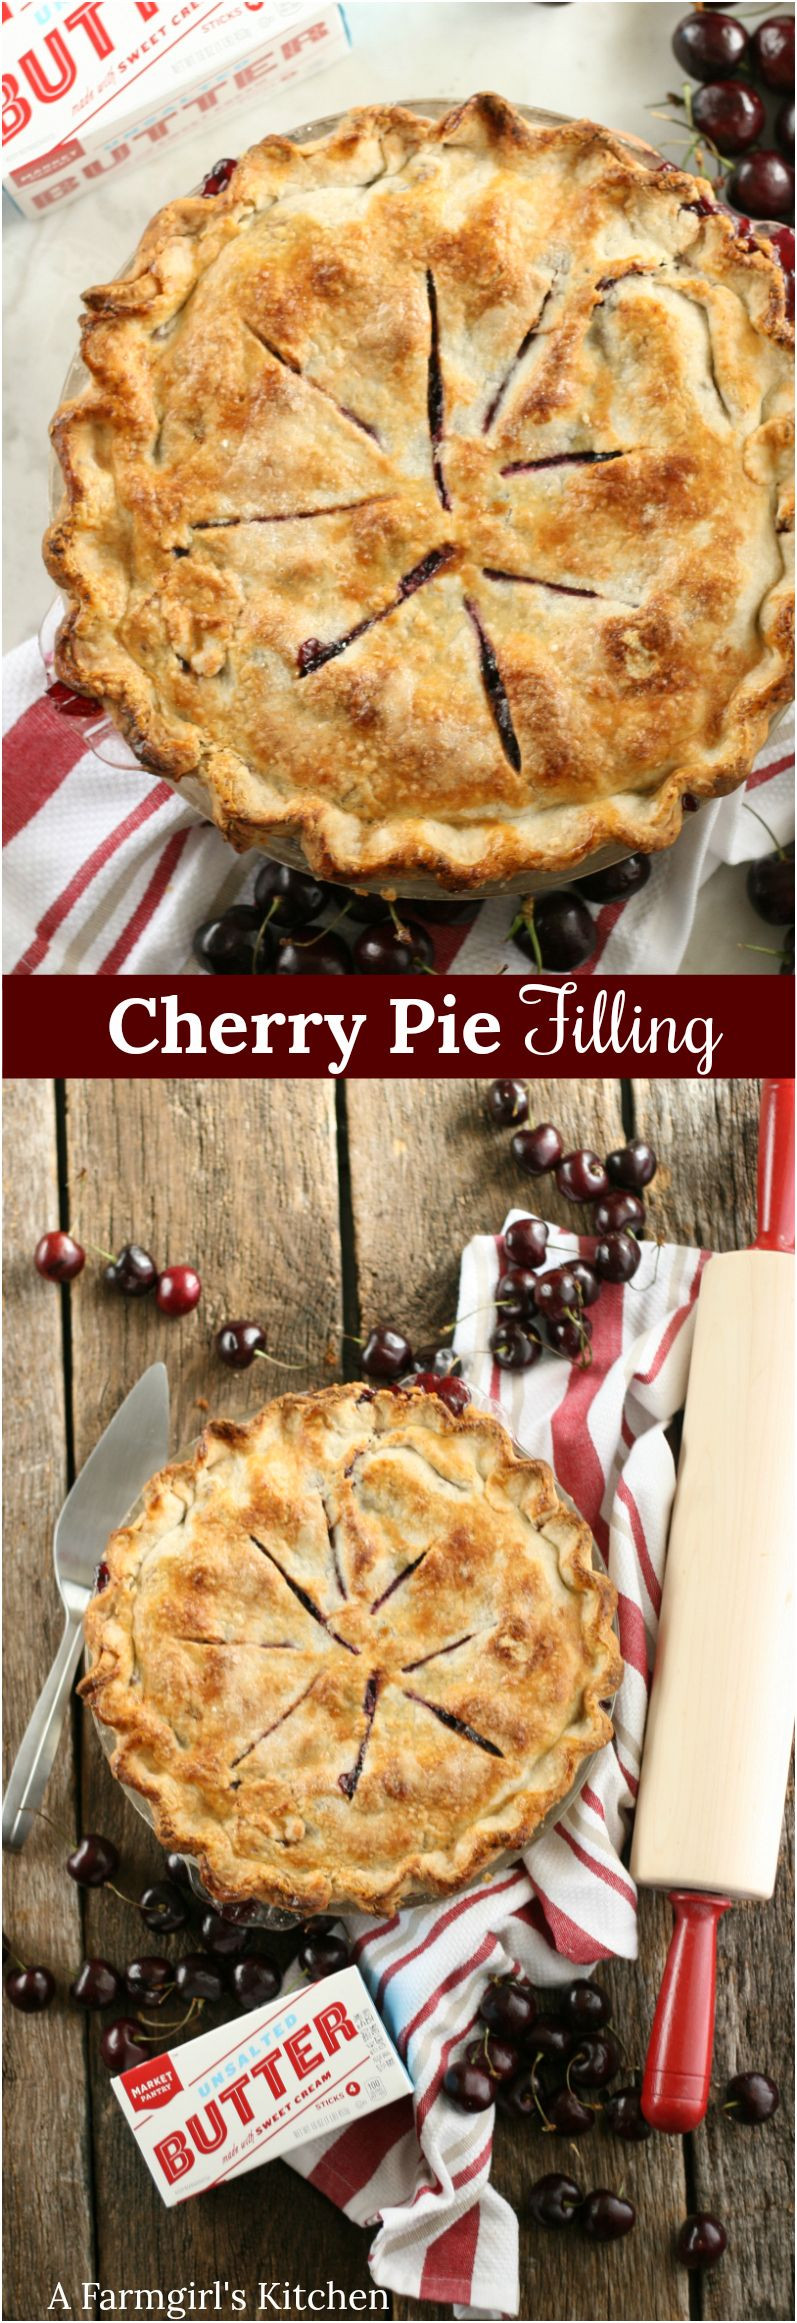 Cherry Pie Filling Desserts
 Make this delicious Homemade Cherry Pie Filling for your